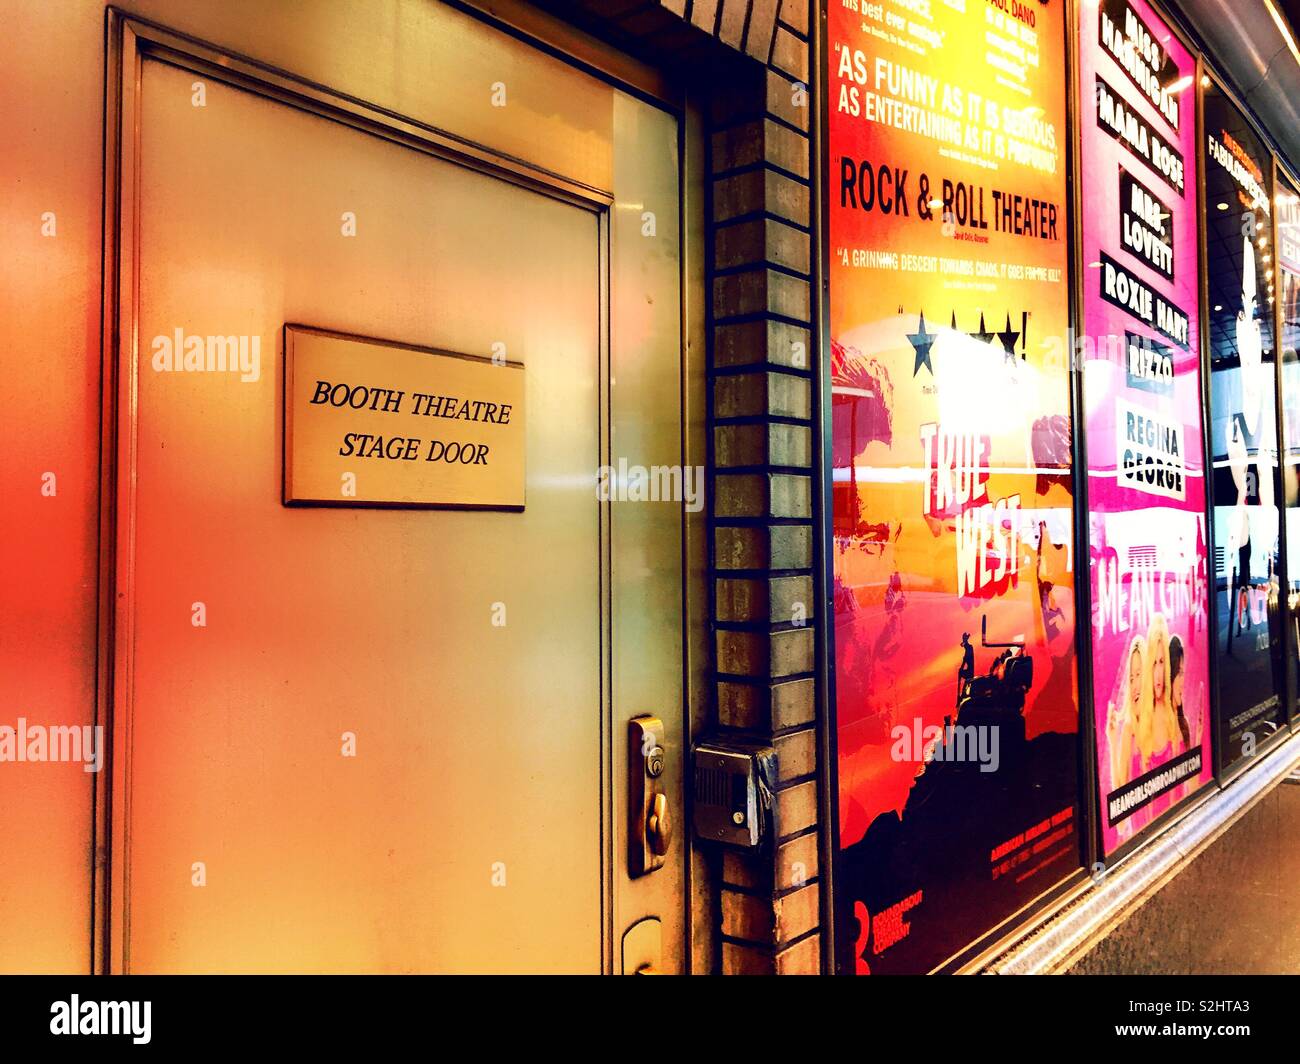 The stage door to the booth theater is in Shubert Alley in Times Square, New York City, United States Stock Photo